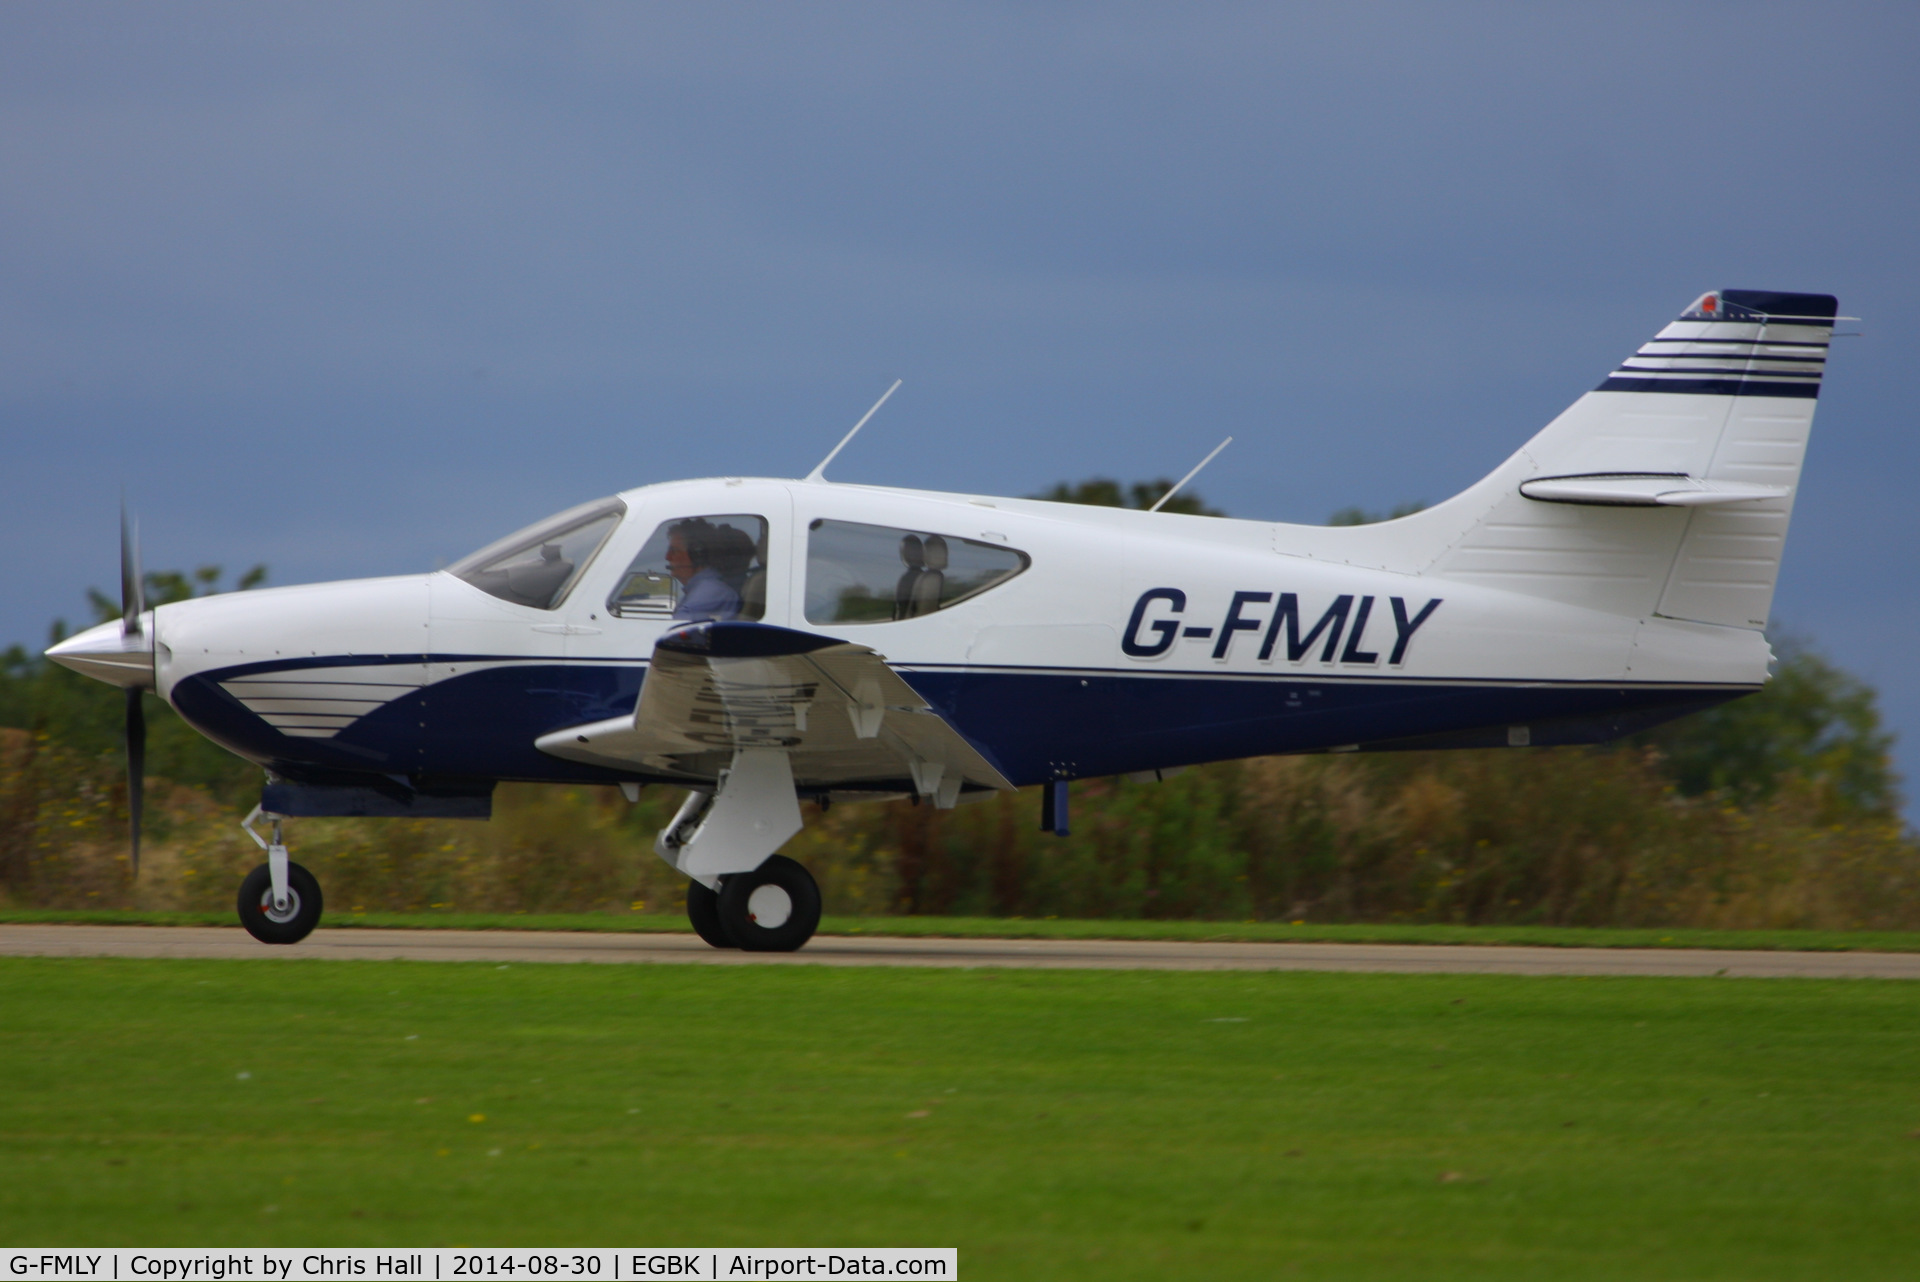 G-FMLY, 1998 Rockwell Commander 114B C/N 14655, at the LAA Rally 2014, Sywell